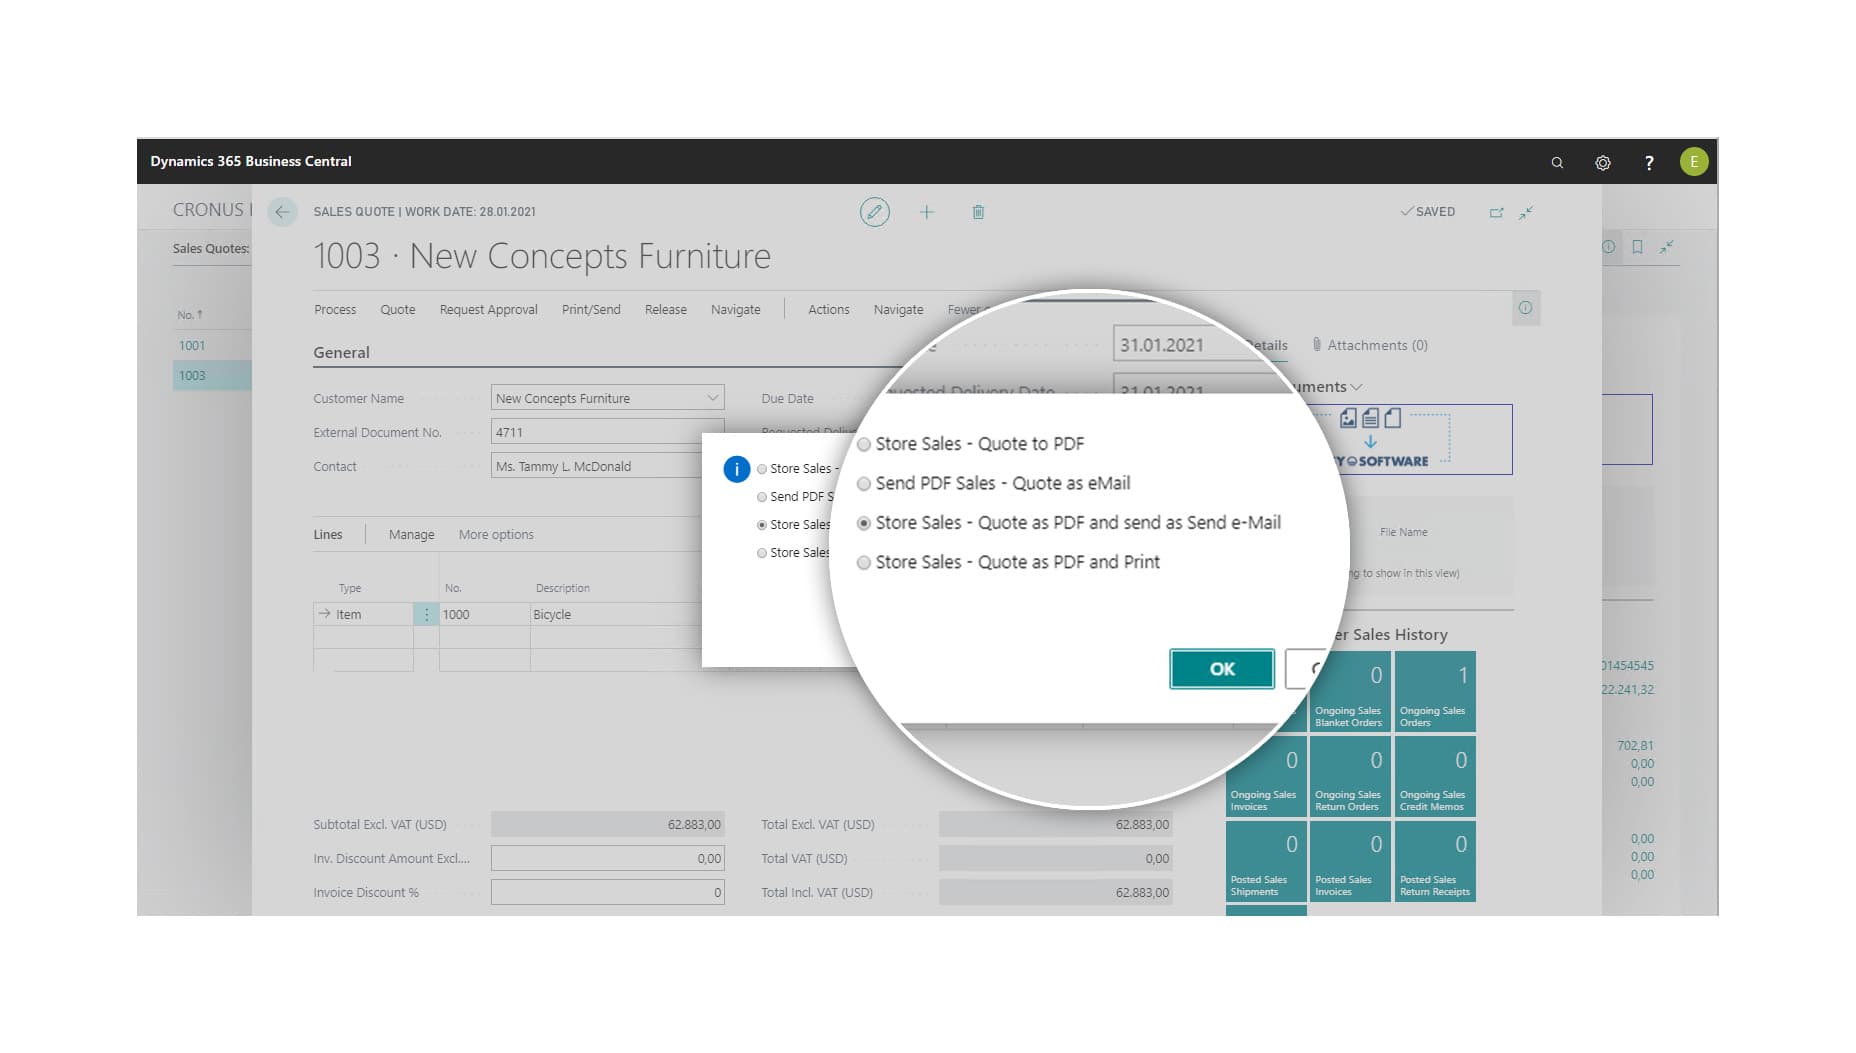 Very best user experience with EASY for Dynamics 365 Business Central